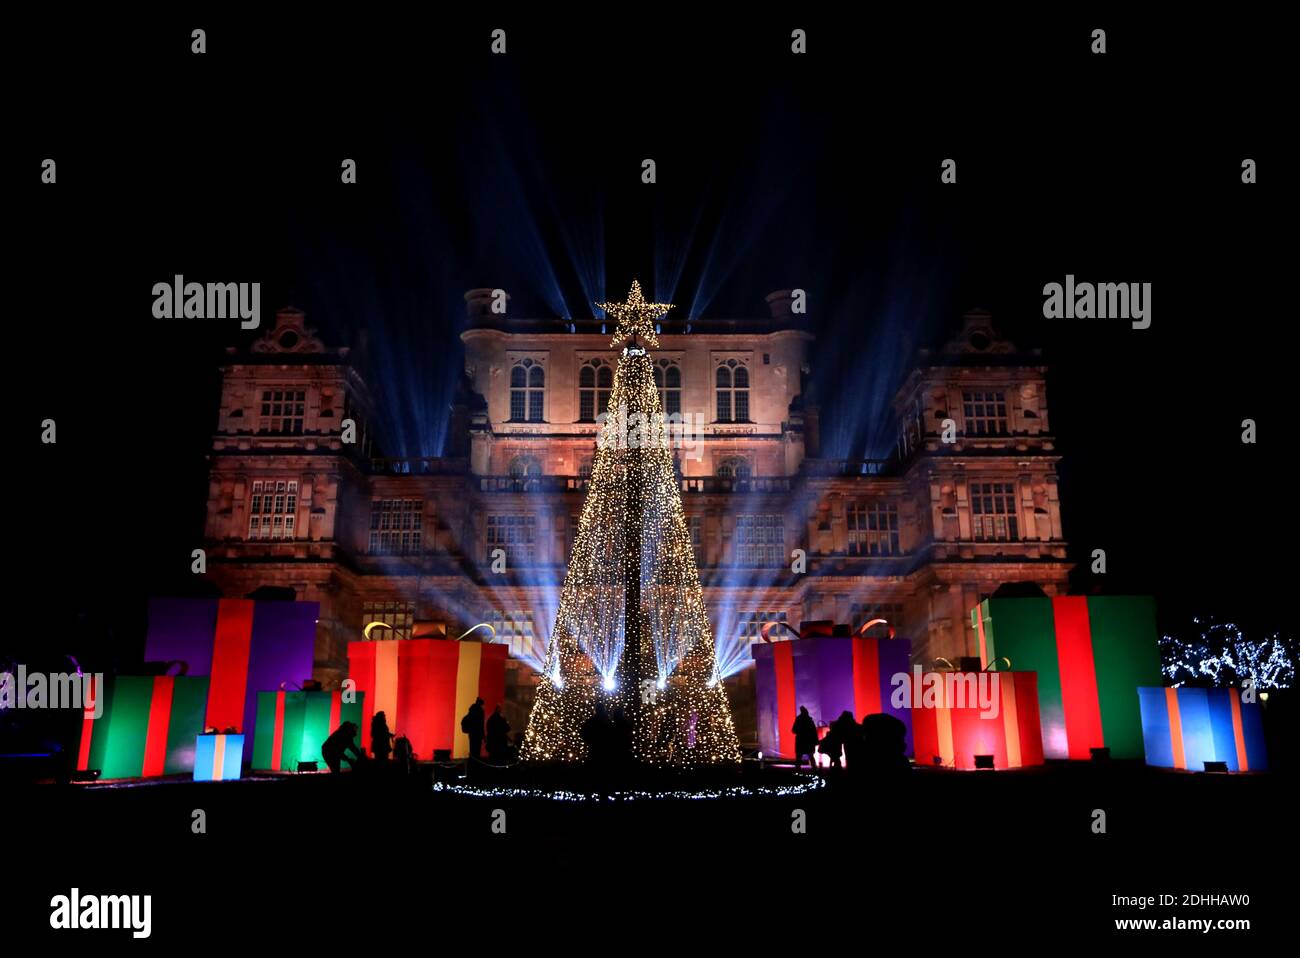 Wollaton Hall in Nottingham which has been transformed into an enchanted light experience to create Christmas at Wollaton Hall, a unique, socially distanced festive outdoor light installation. Stock Photo